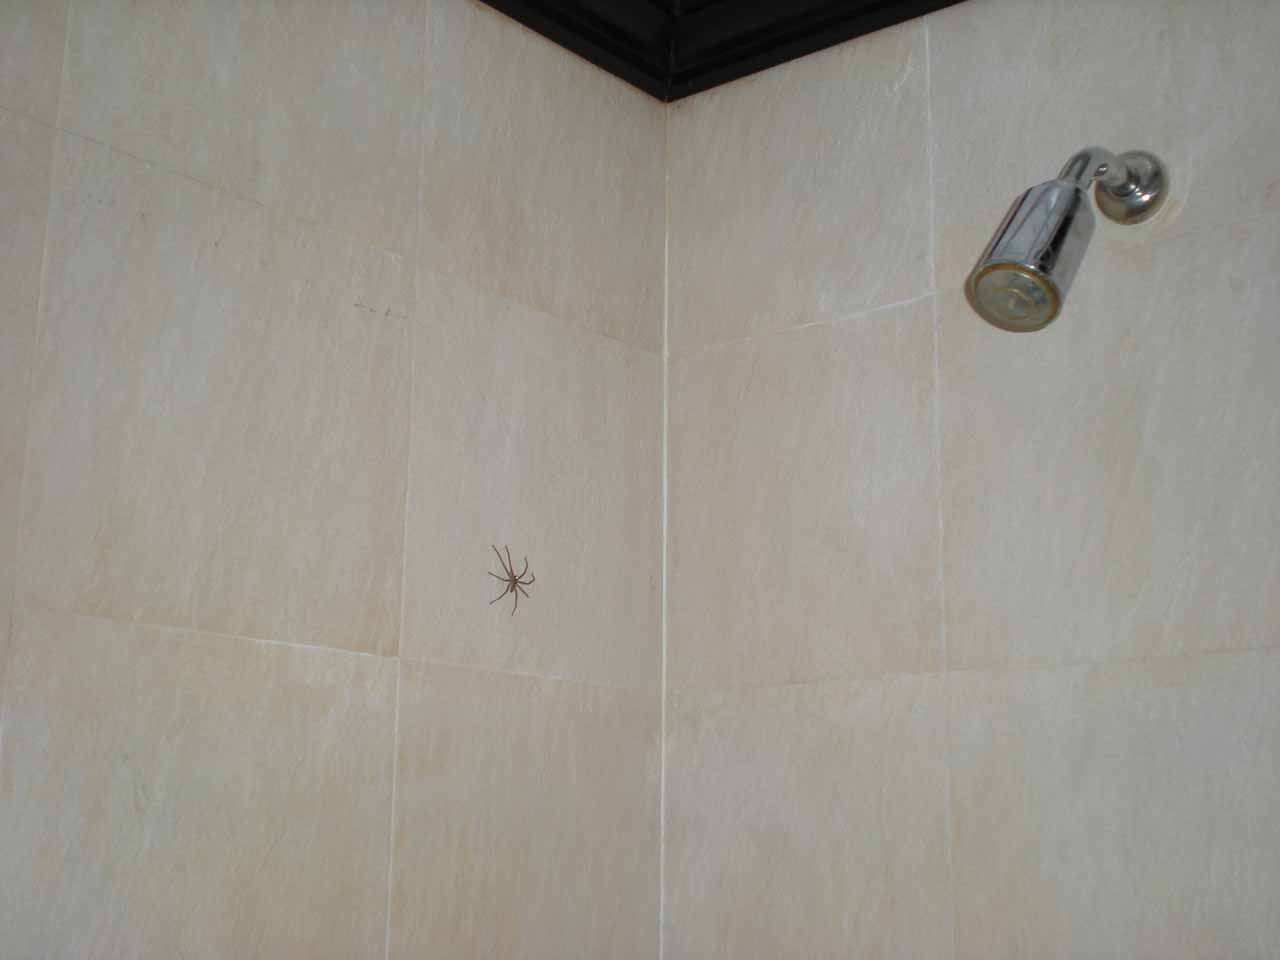 Regardless of what the reviews say, even the best of accommodations can yield moments like these (where we saw a large spider in the bathroom almost the diameter of the shower head)